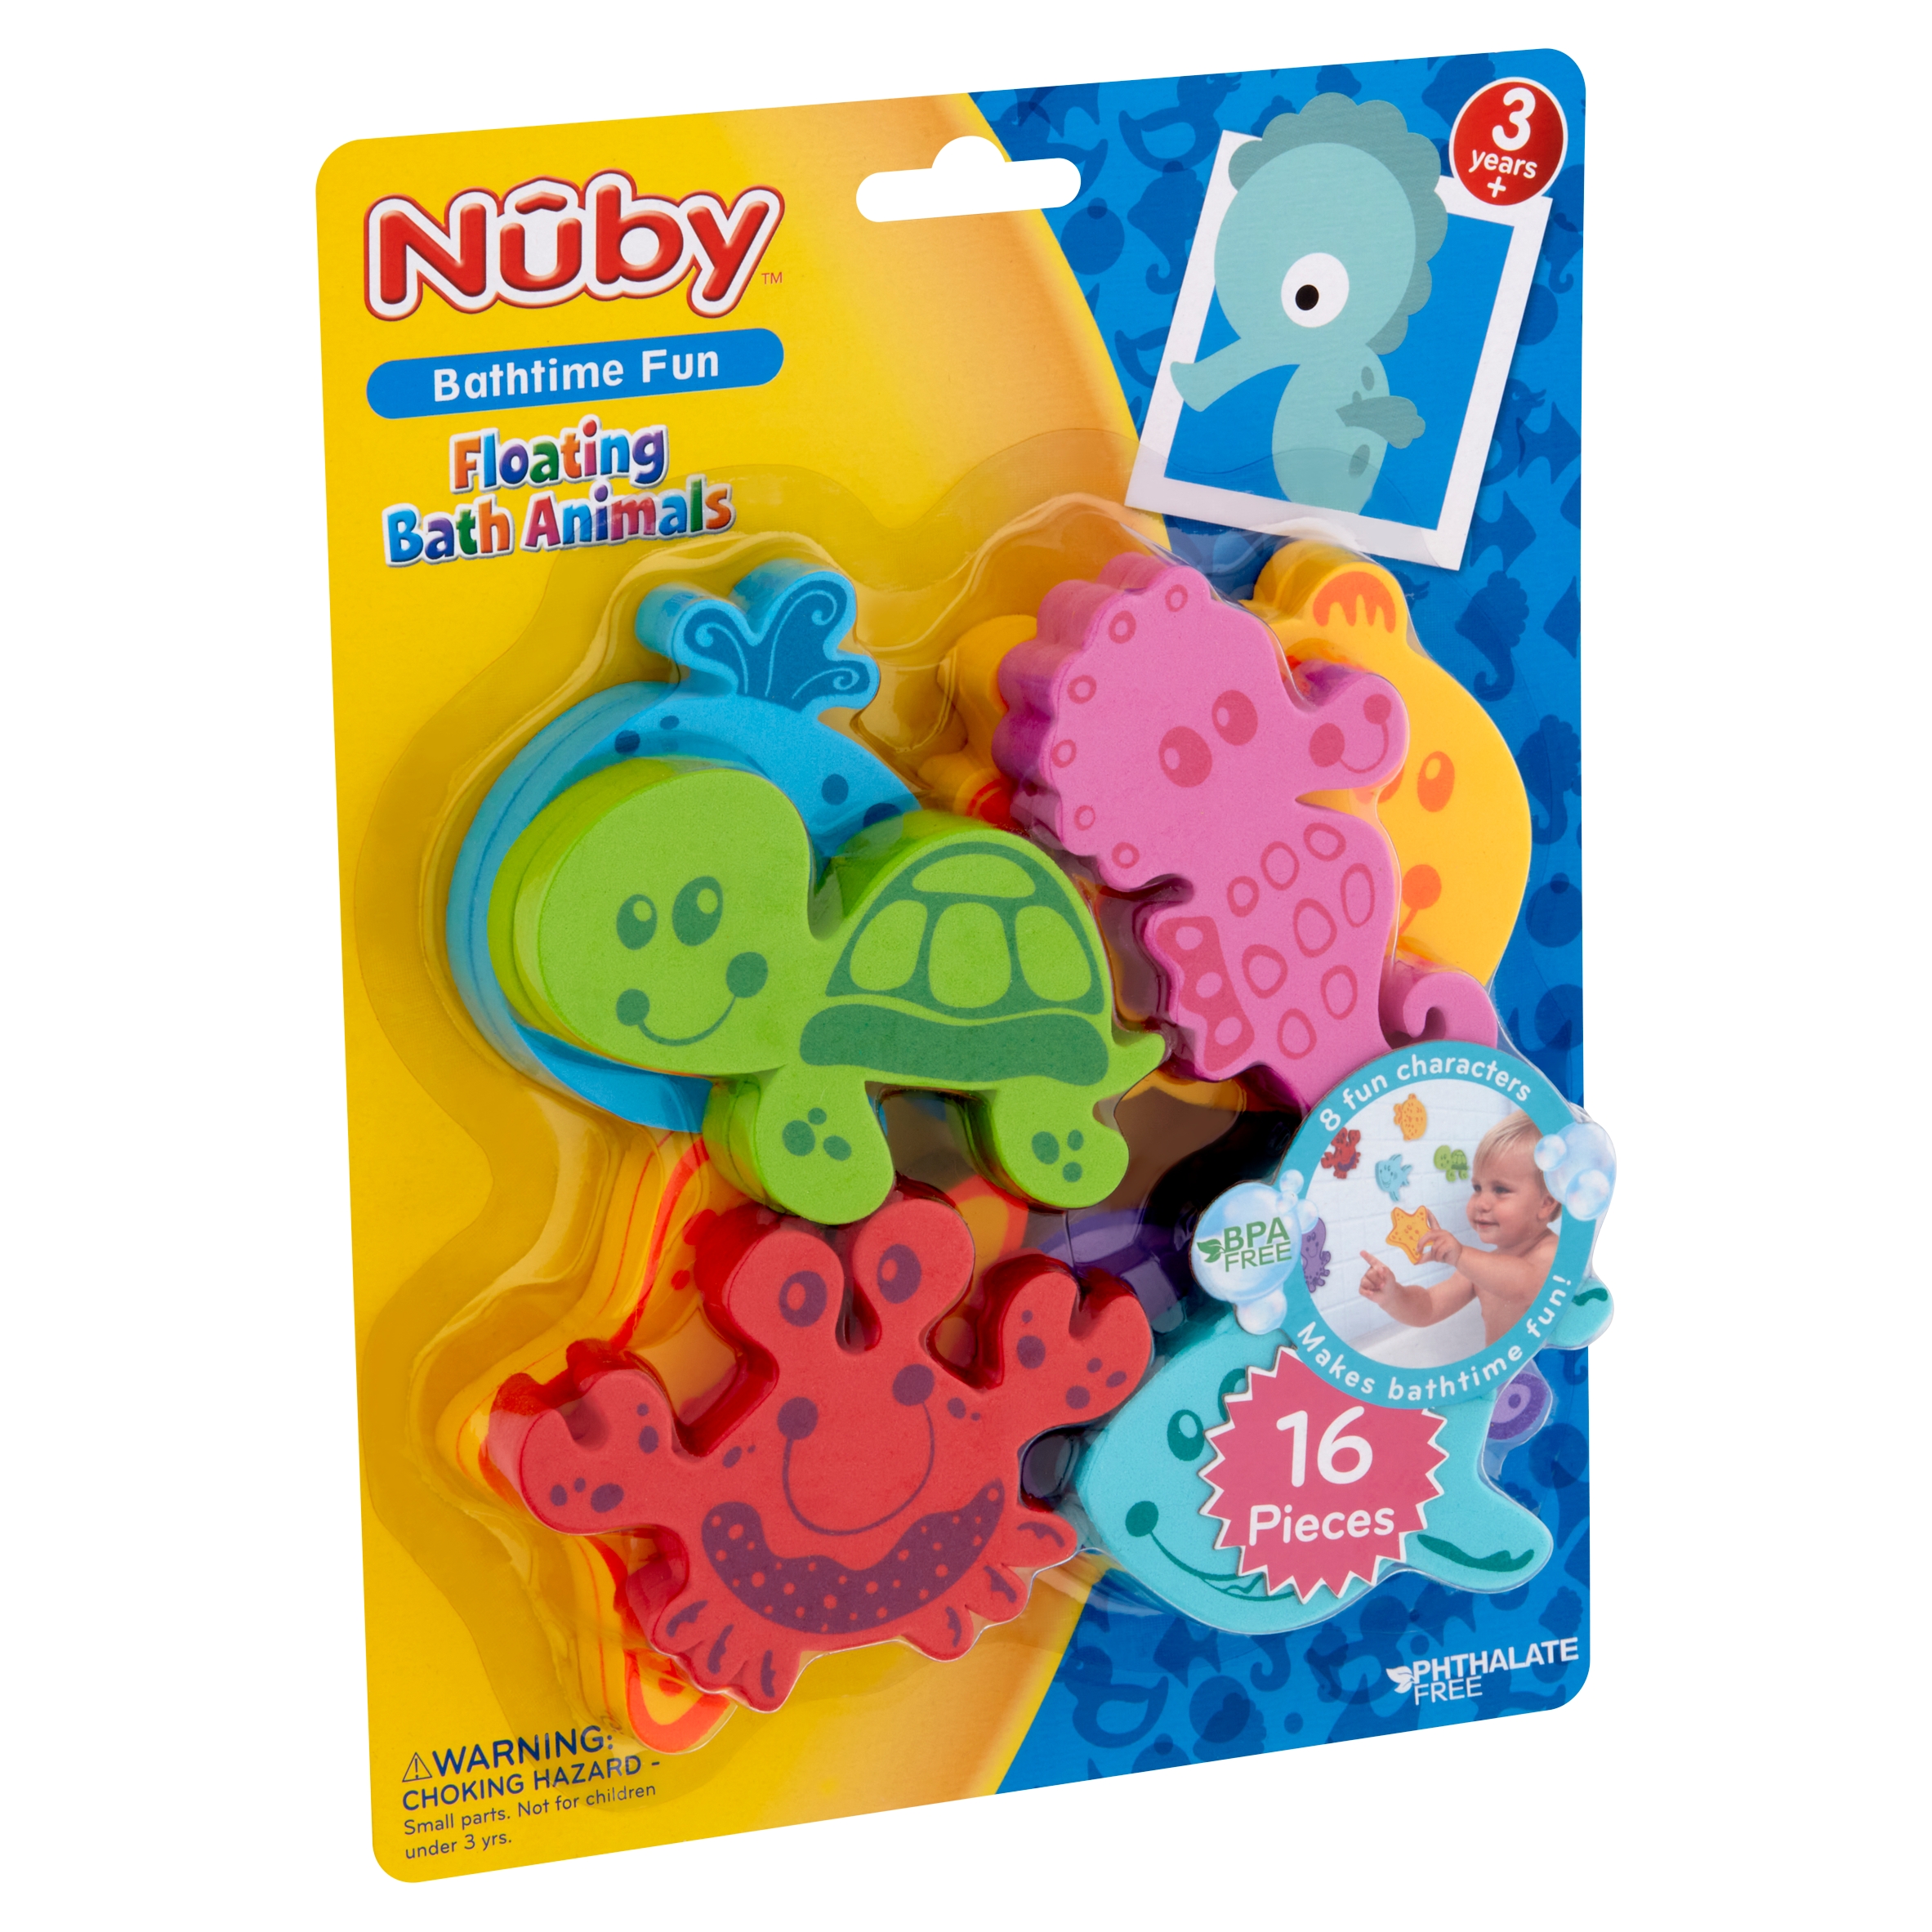 Nûby Floating Bath Animals, 3 years+, 16 count - image 1 of 5